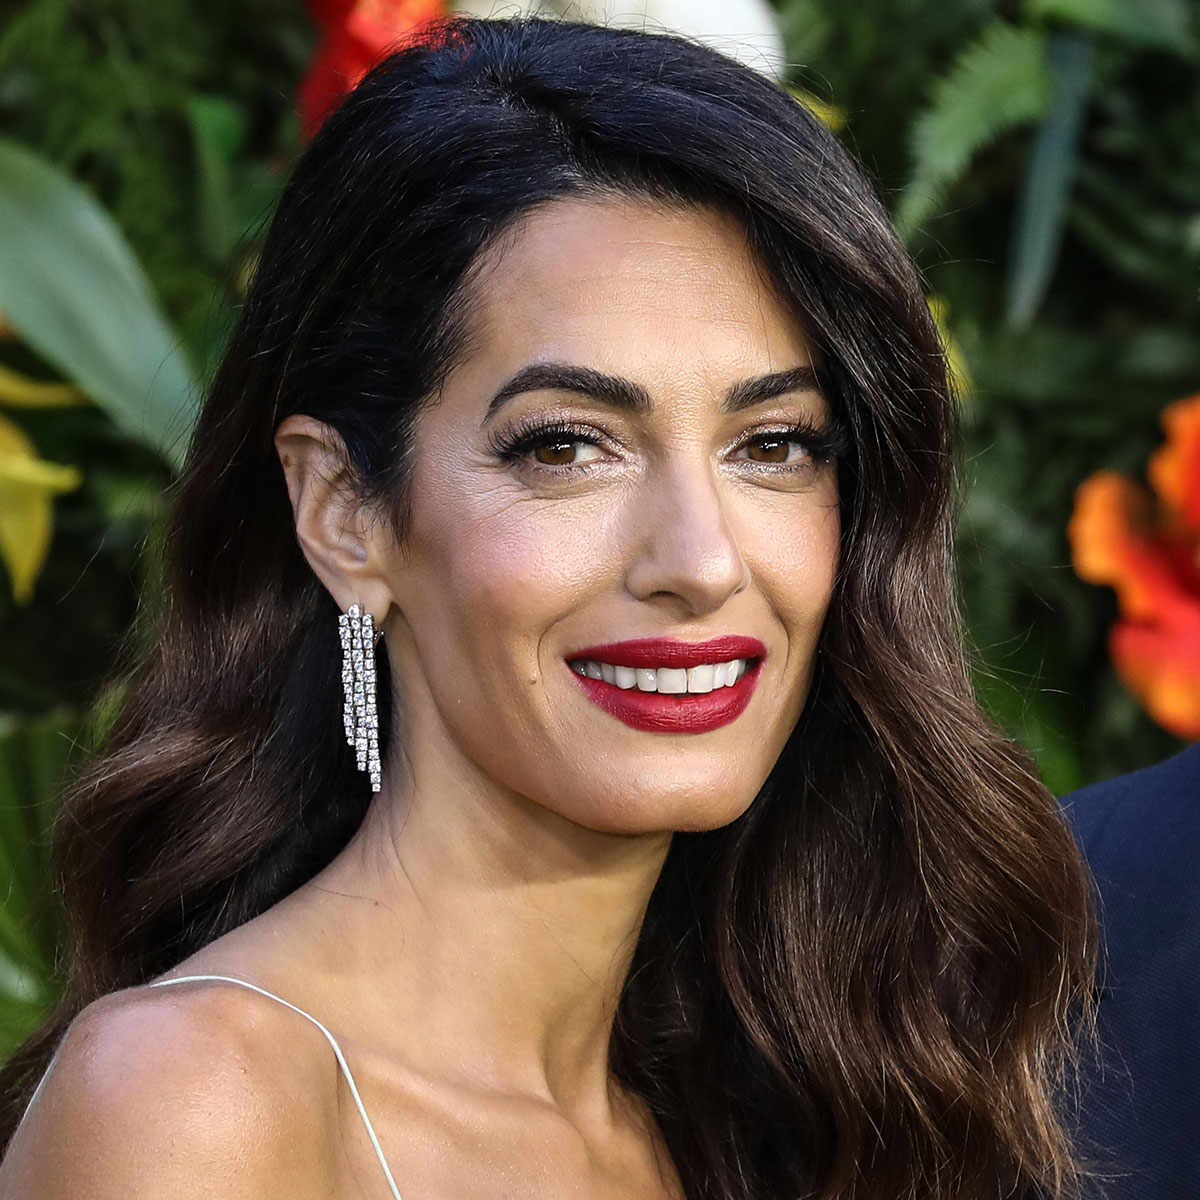 Amal Clooney Is the Latest Celebrity to Wear This Outdated Bag